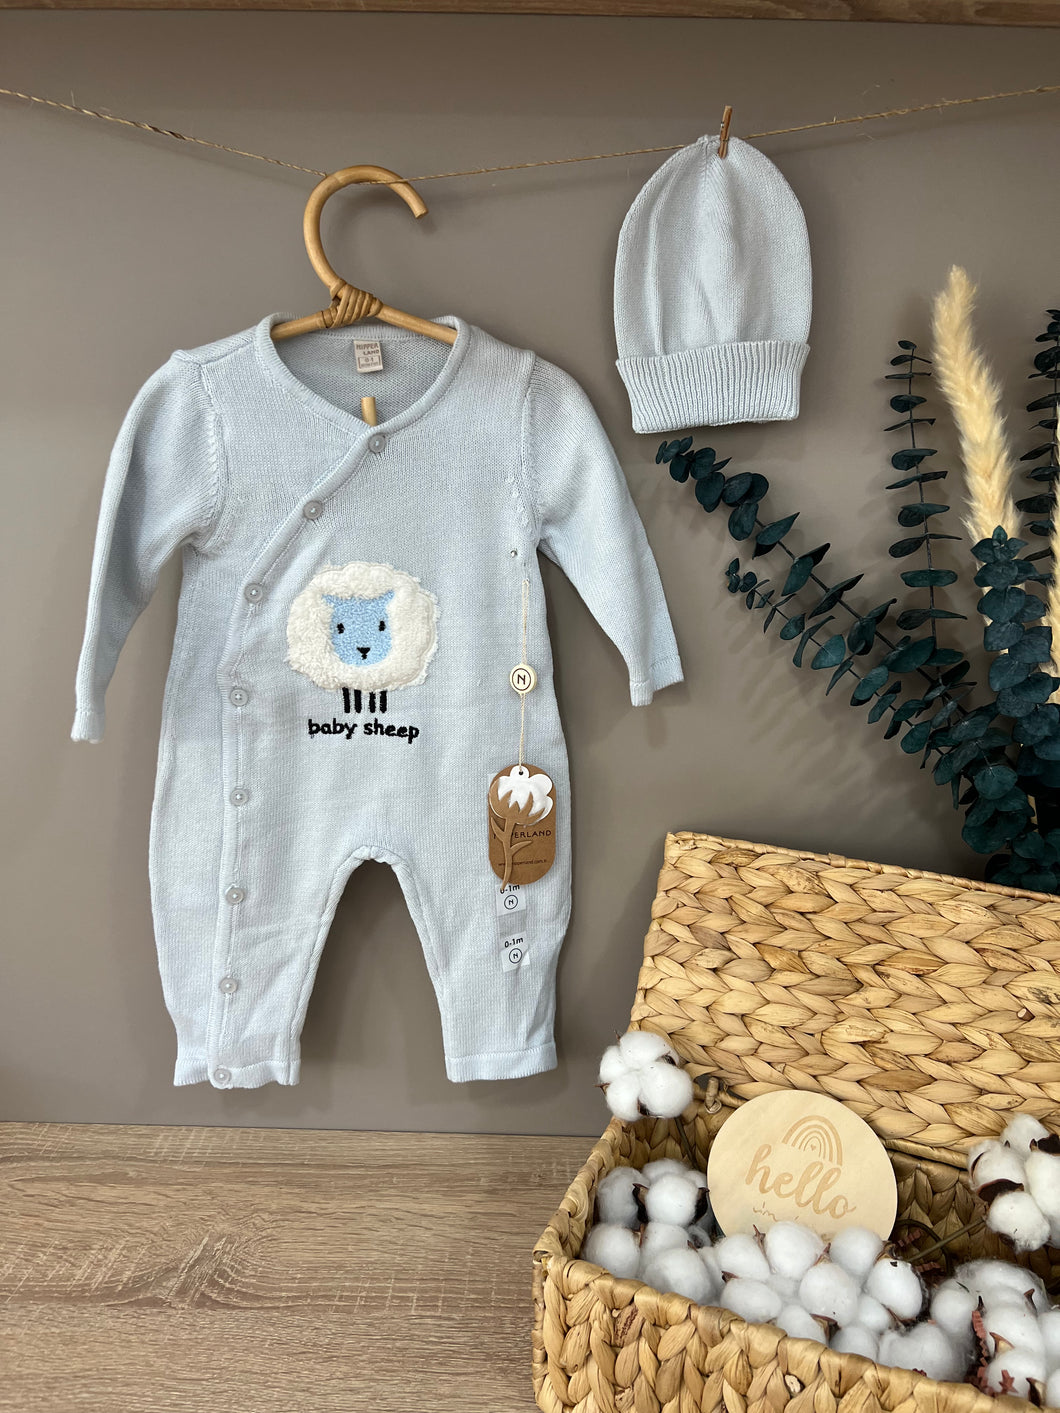 Baby sheep overall-blue